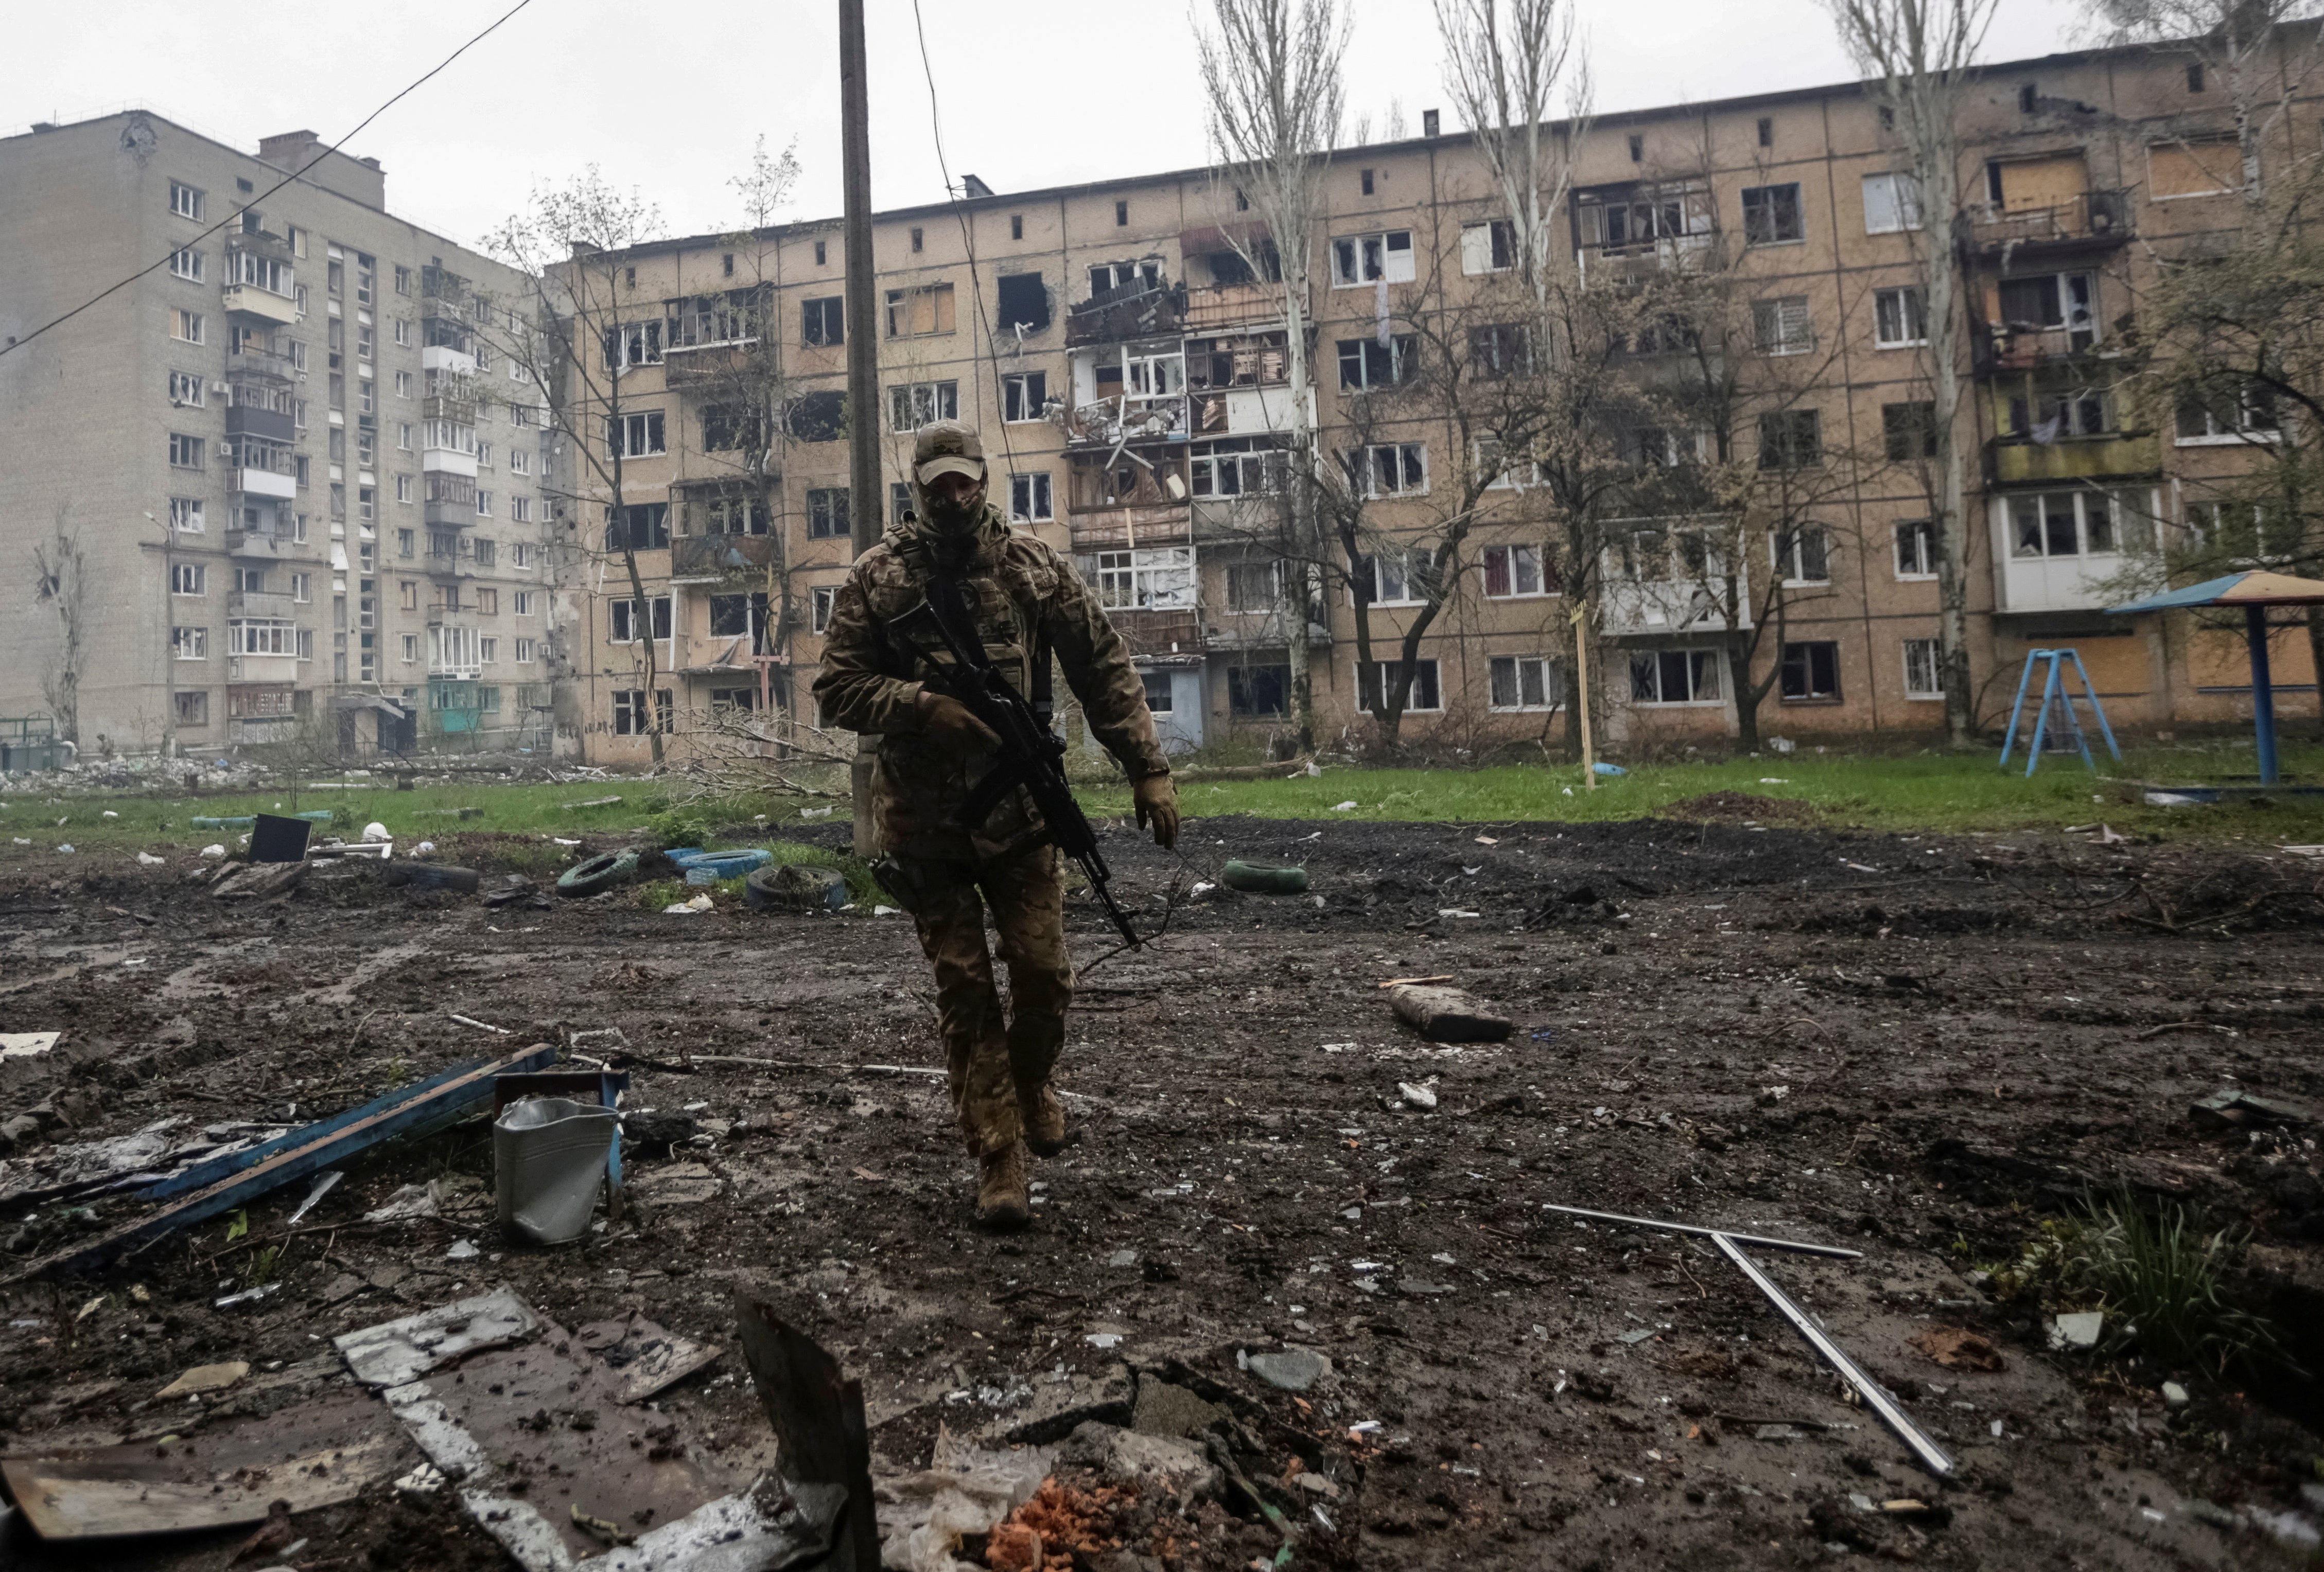 A Ukrainian service member walks near residential buildings damaged by a Russian military strike, amid Russia's attack on Ukraine, in the front line town of Bakhmut, in Donetsk region